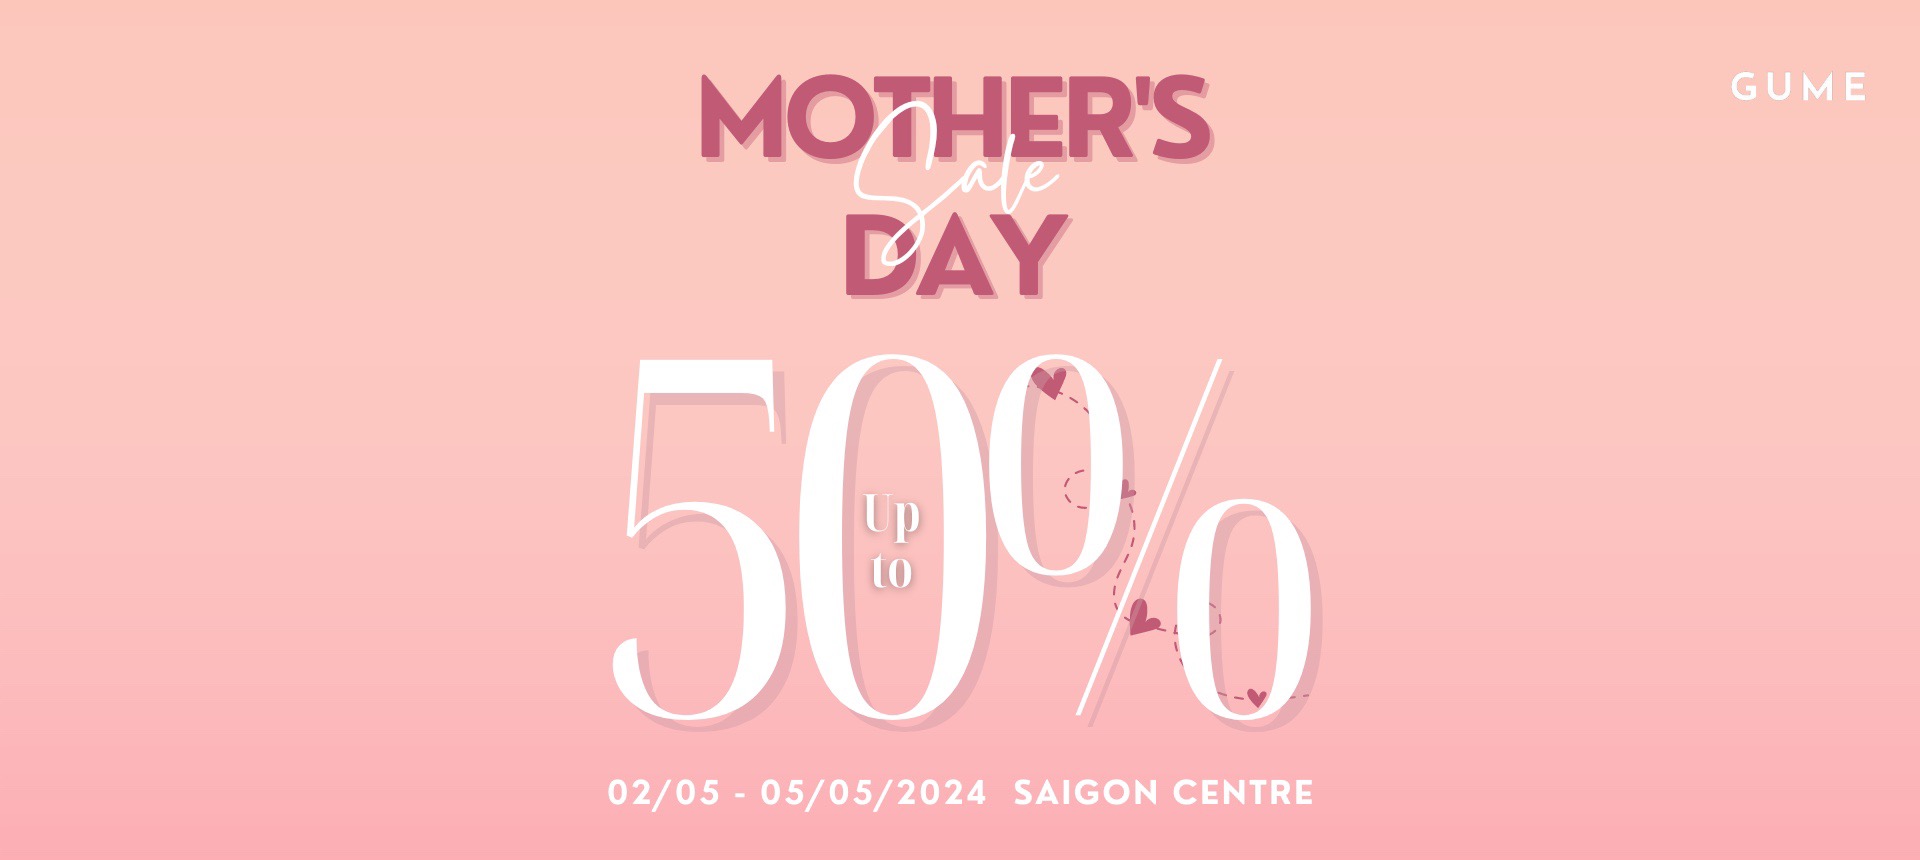 MOTHER’S DAY SALE - SPECIAL DEALS UP TO 50%